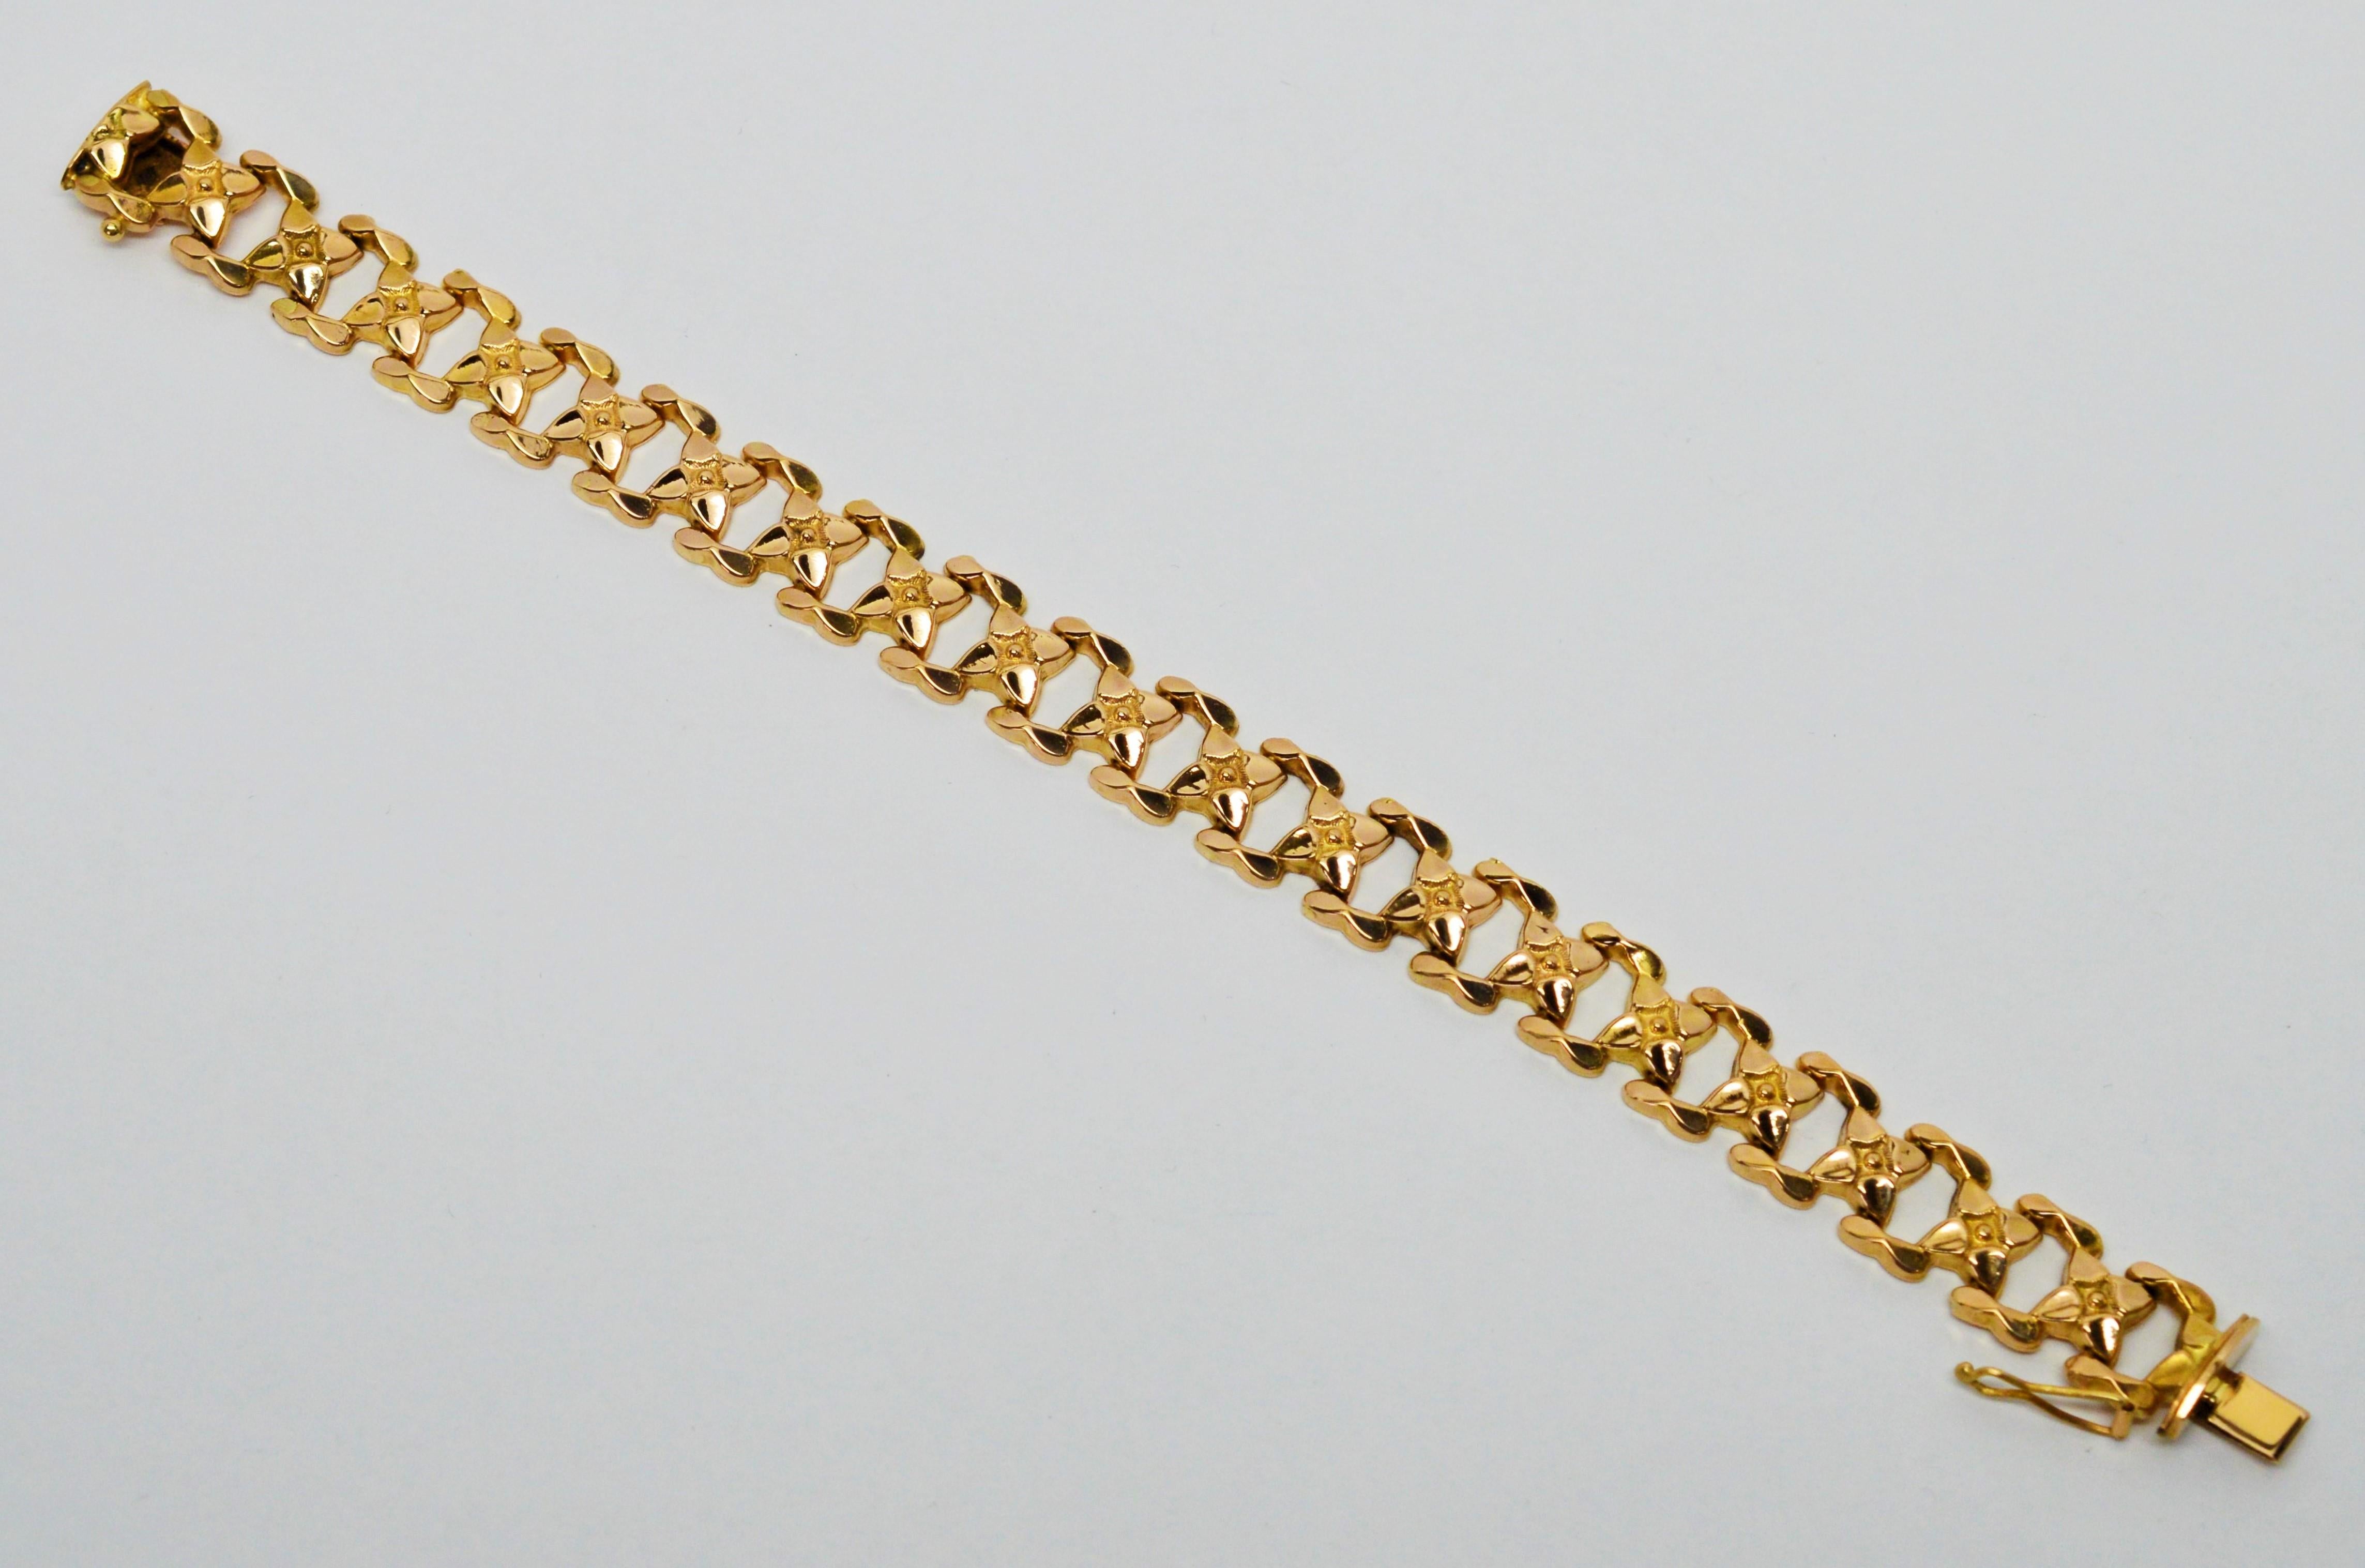 In bright eighteen karat 18K yellow gold, pretty floral links in a 7.5 inch length create this Italian made, quality gold bracelet.
Slender profile with 1/2 inch width.  Signed and stamped by maker. In gift box.  